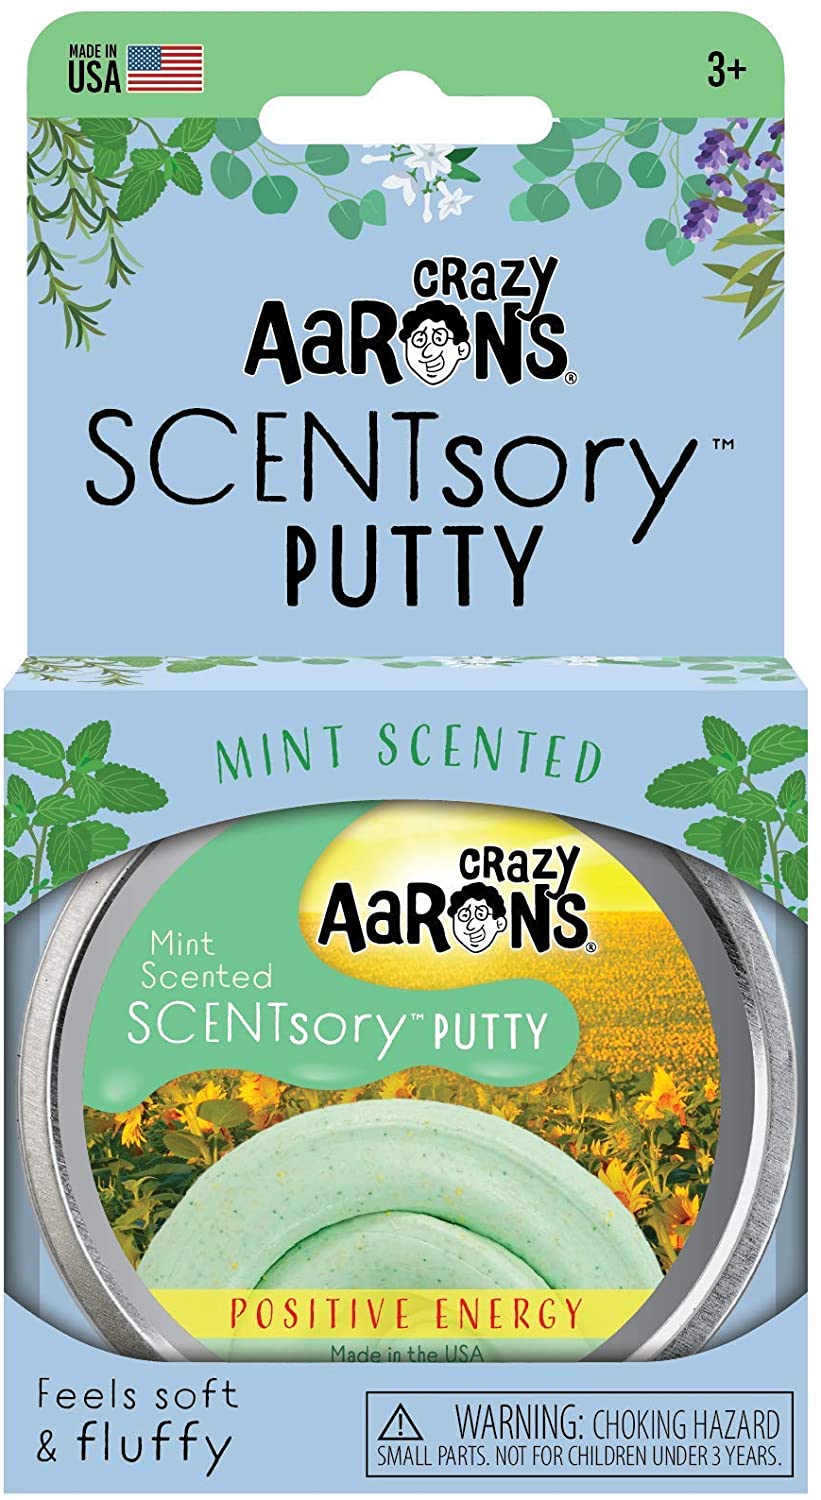 Crazy Aaron's 2.75" Mint Scented Positive Energy Scentsory Putty Tin (SCN-PE055)